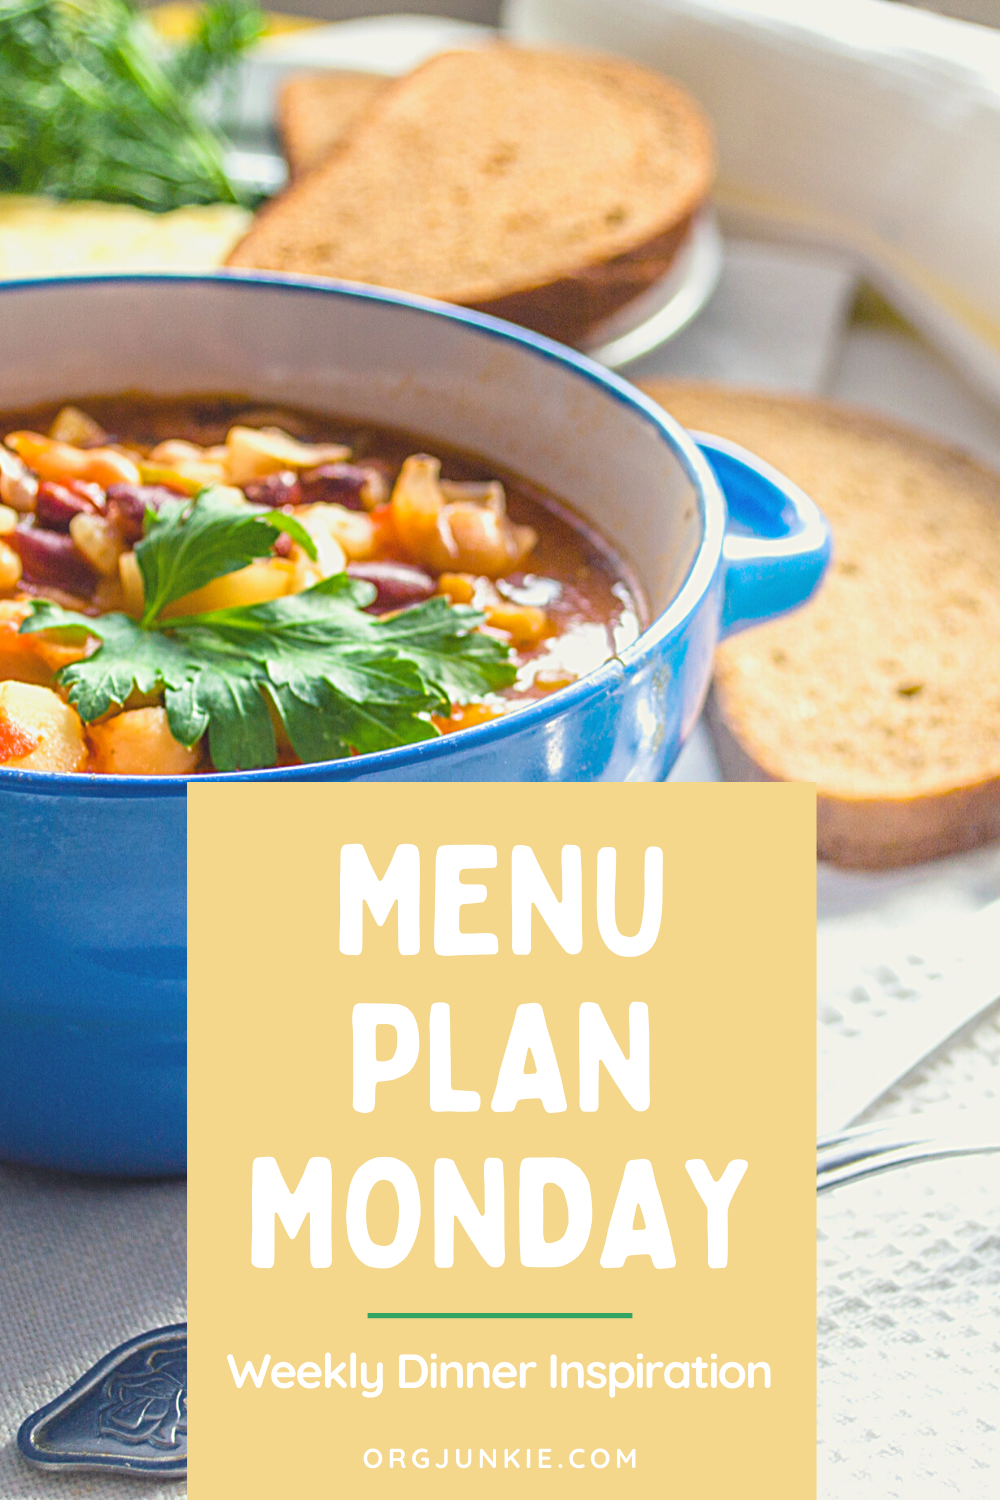 Menu Plan Monday for the week of Sept 28/20 ~ Weekly Dinner Inspiration at I'm an Organizing Junkie